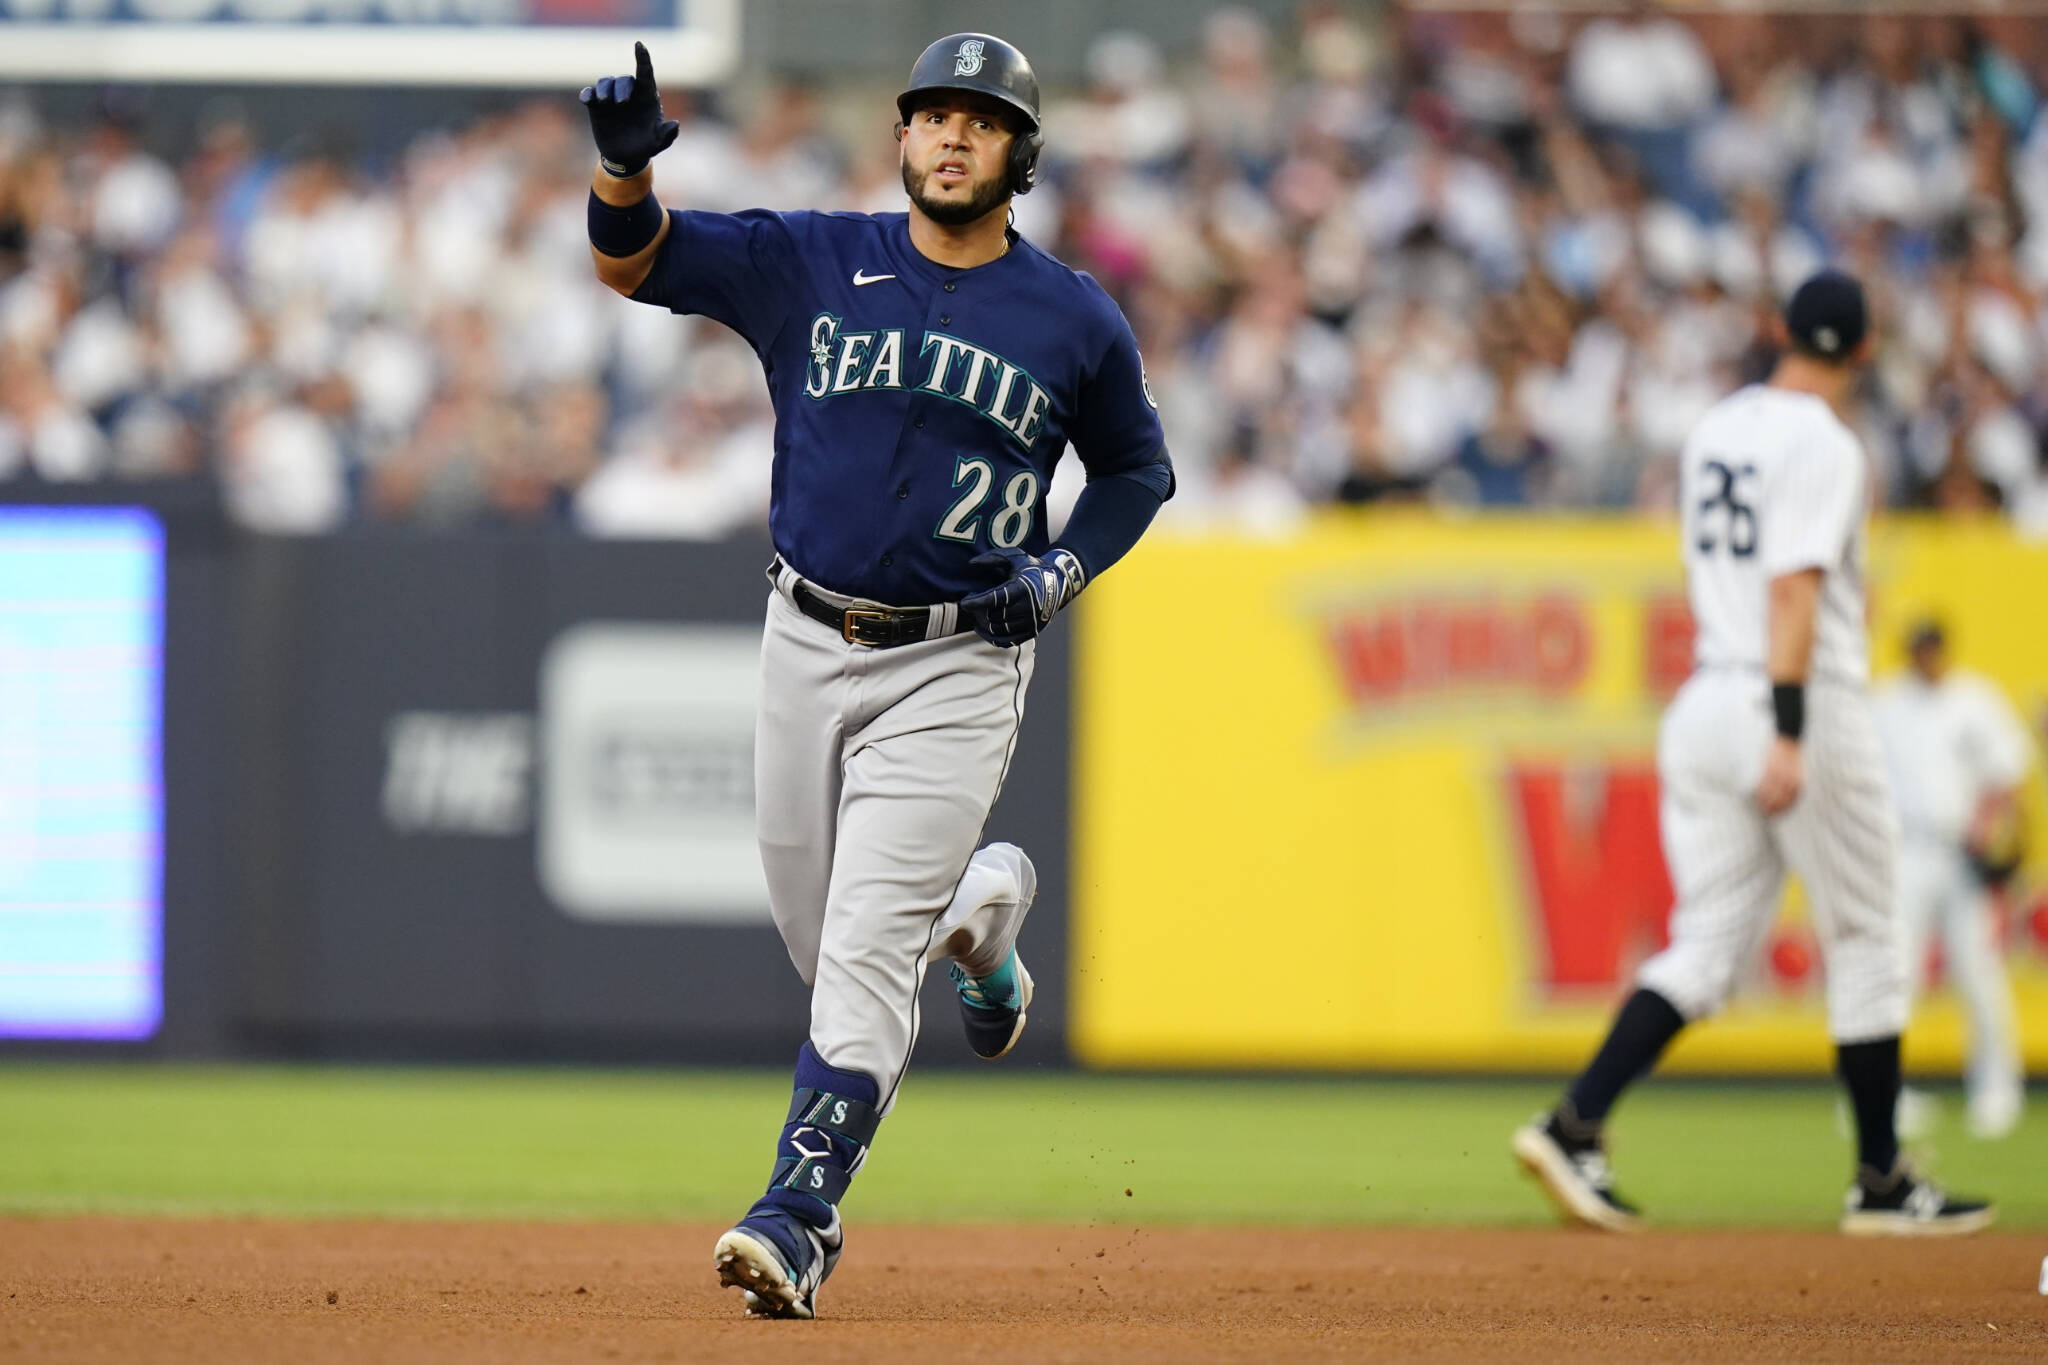 The Mariners’ Eugenio Suarez gestures to fans as he runs the bases after hitting a two-run home run during the first inning of a game against the Yankees on Tuesday in New York. (AP Photo/Frank Franklin II)